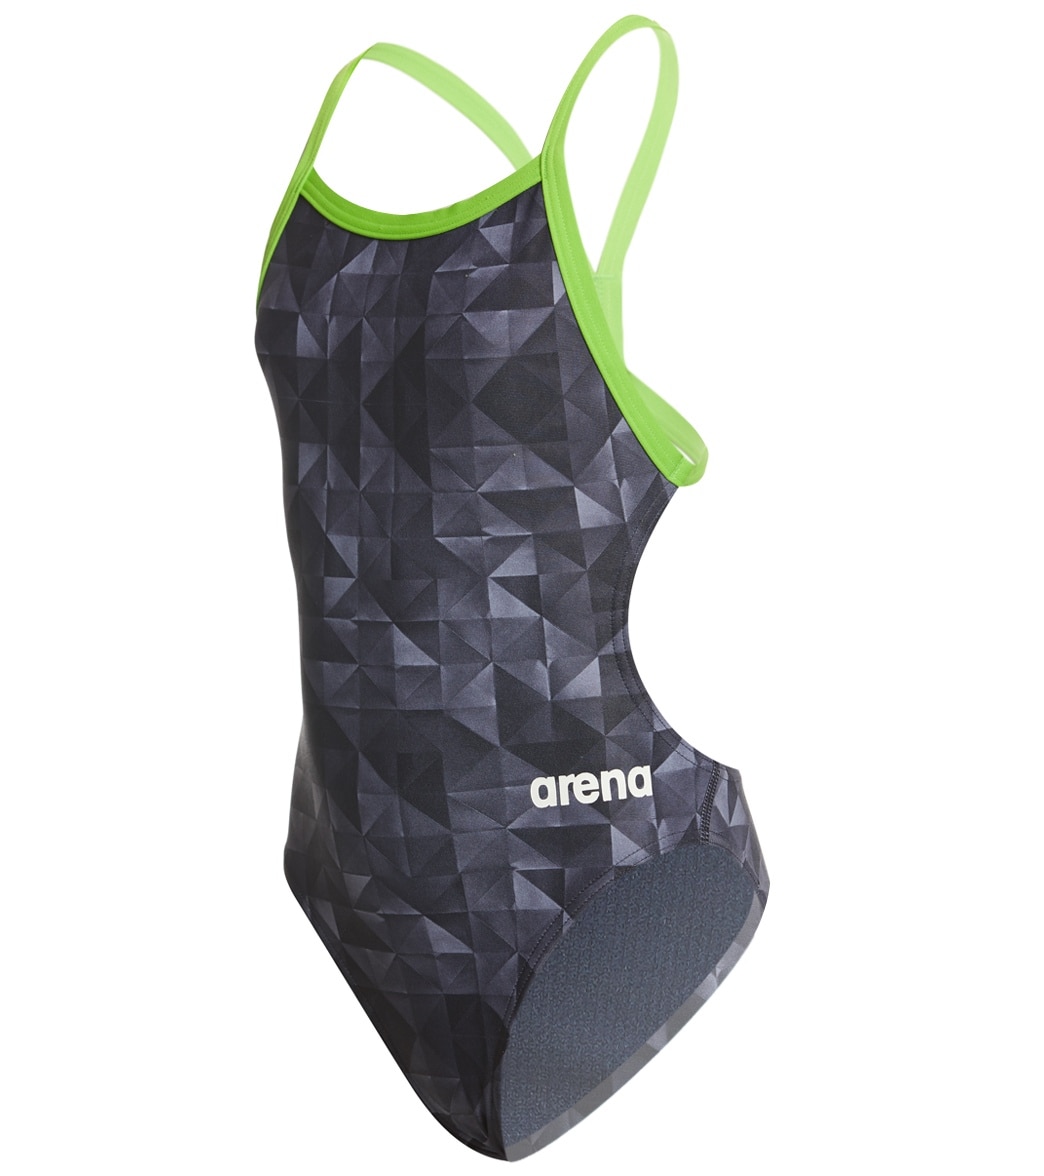 Arena Girls' Mast Origami Maxlife Open Racer Back One Piece Swimsuit - Black/Leaf 22 Polyester/Pbt - Swimoutlet.com